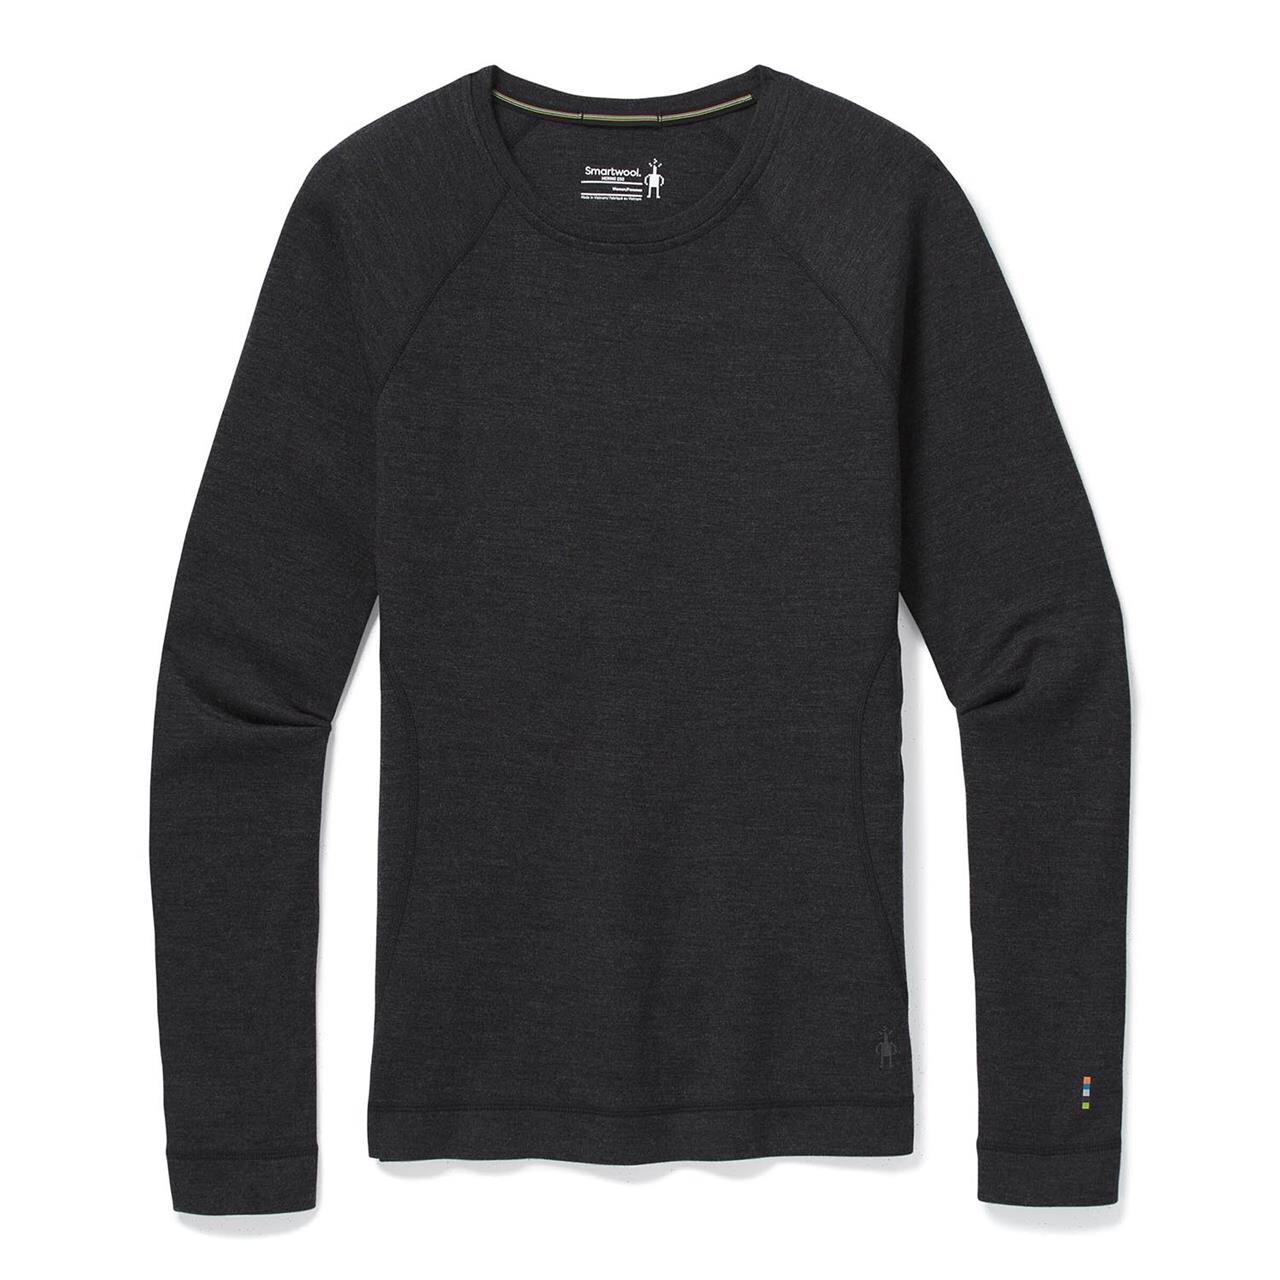 Se Smartwool Womens Cl Thermal Merino Base Layer Crew (Grå (CHARCOAL HEATHER) Small) hos Friluftsland.dk